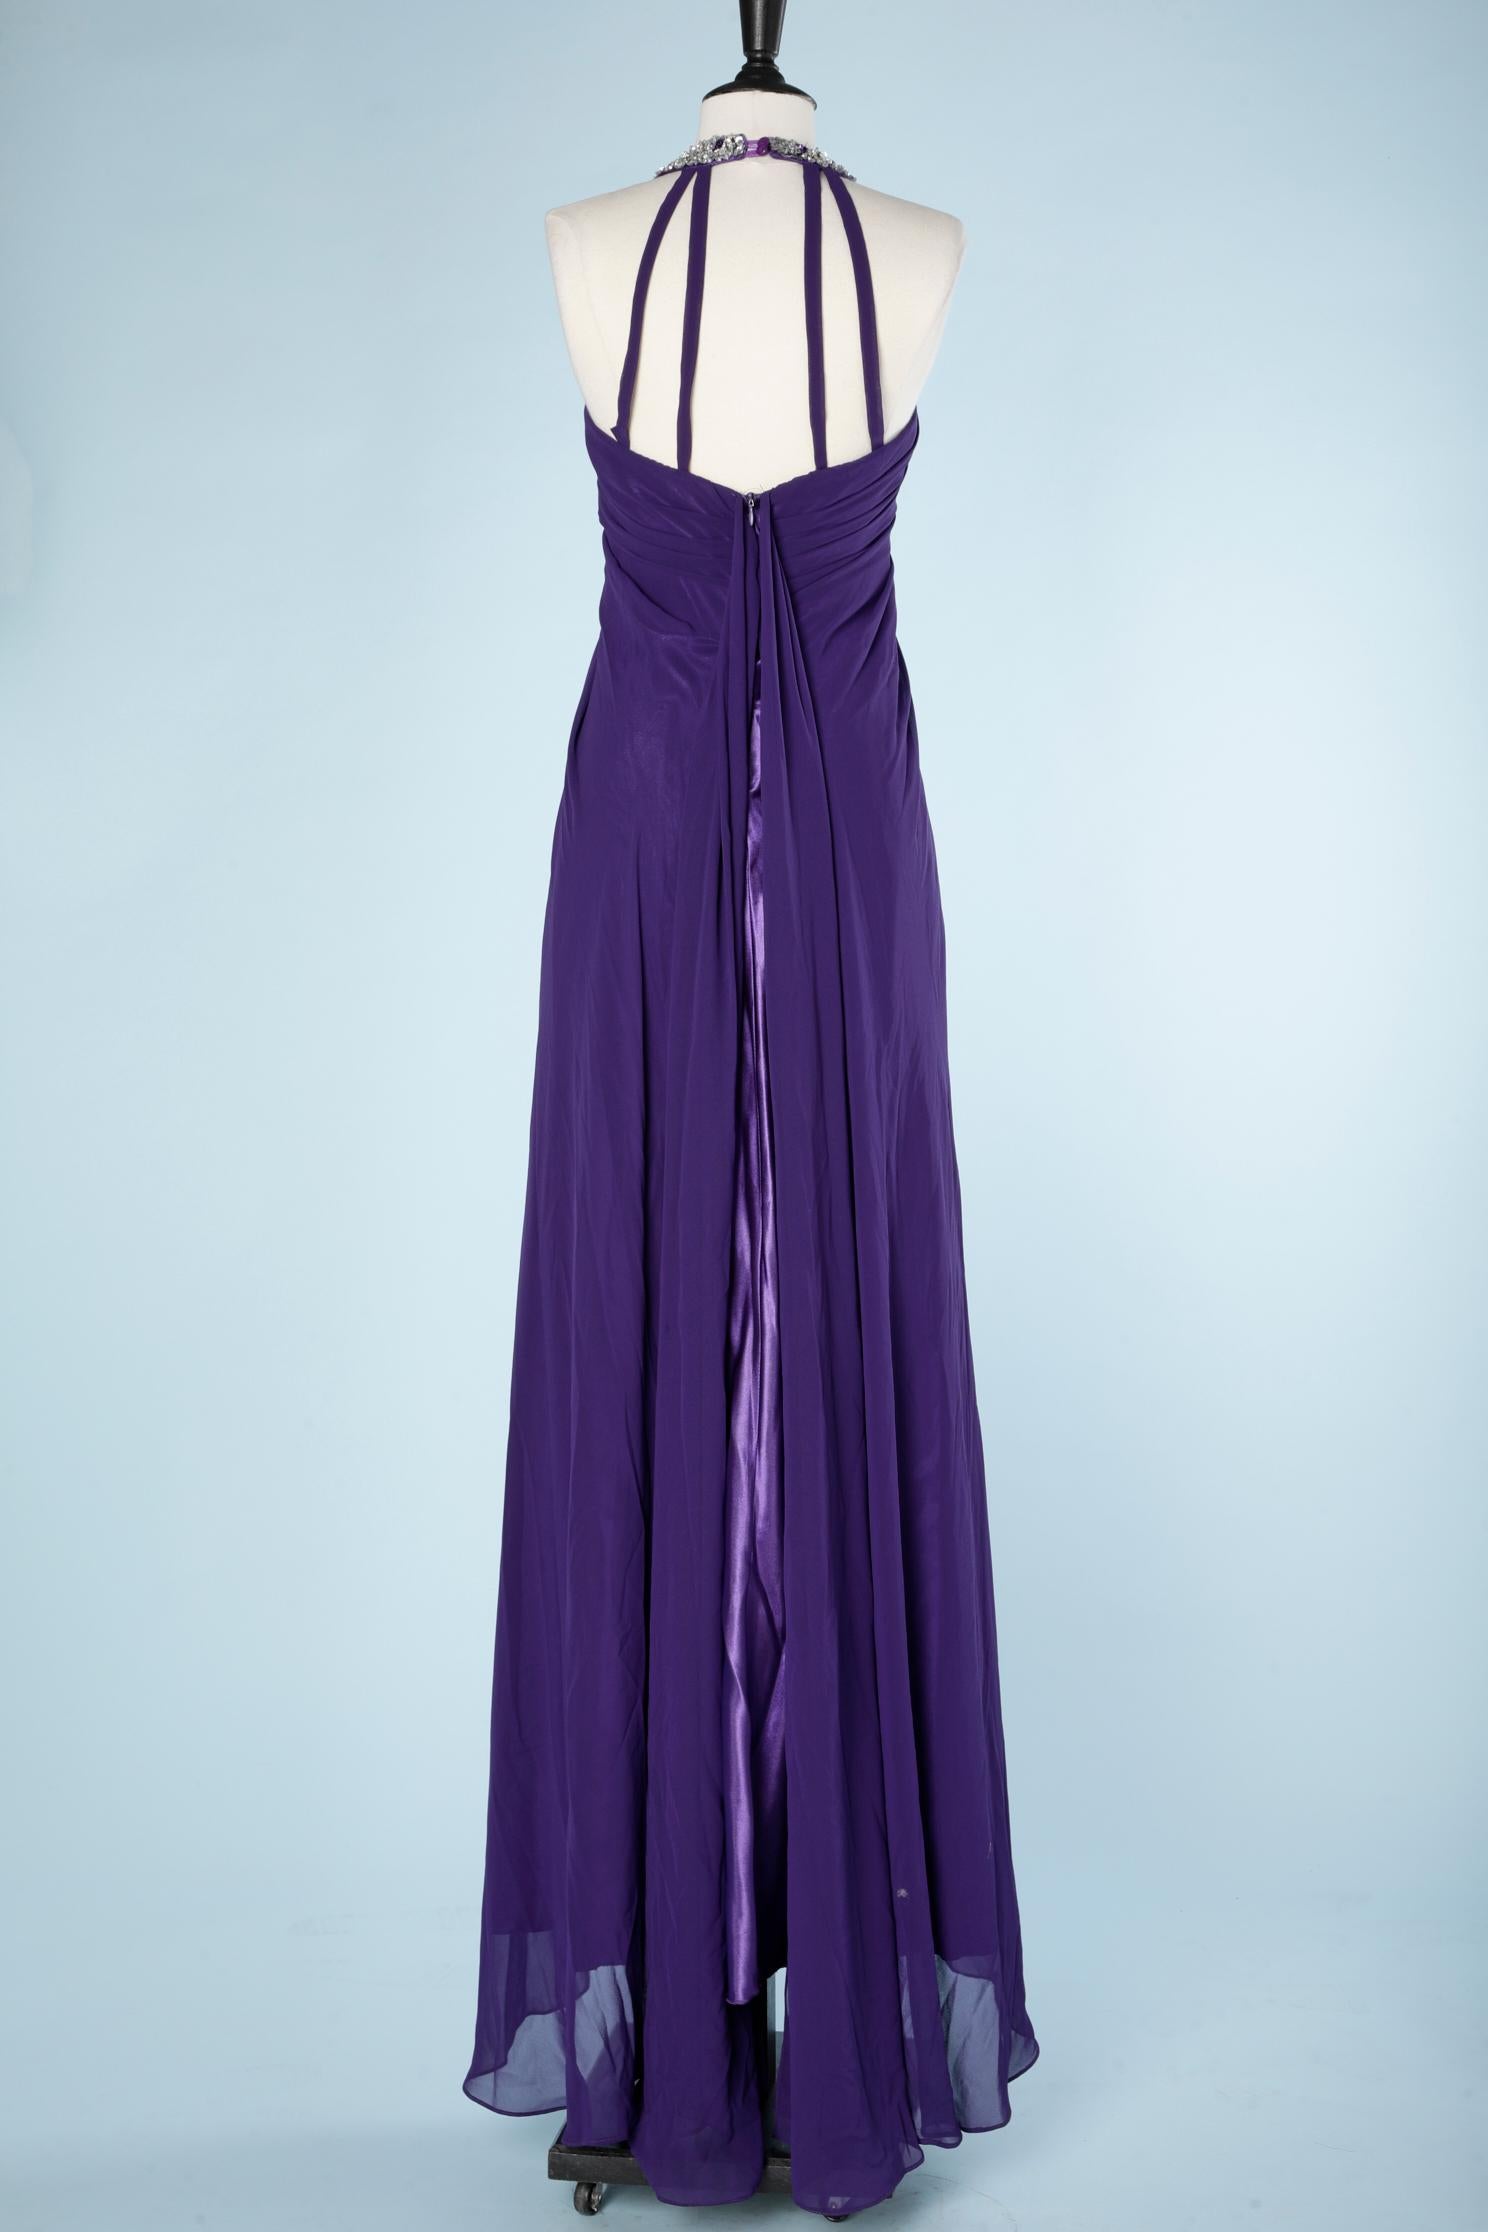 Long evening gown in purple chiffon and satin with a sequin neckless collar In Excellent Condition For Sale In Saint-Ouen-Sur-Seine, FR